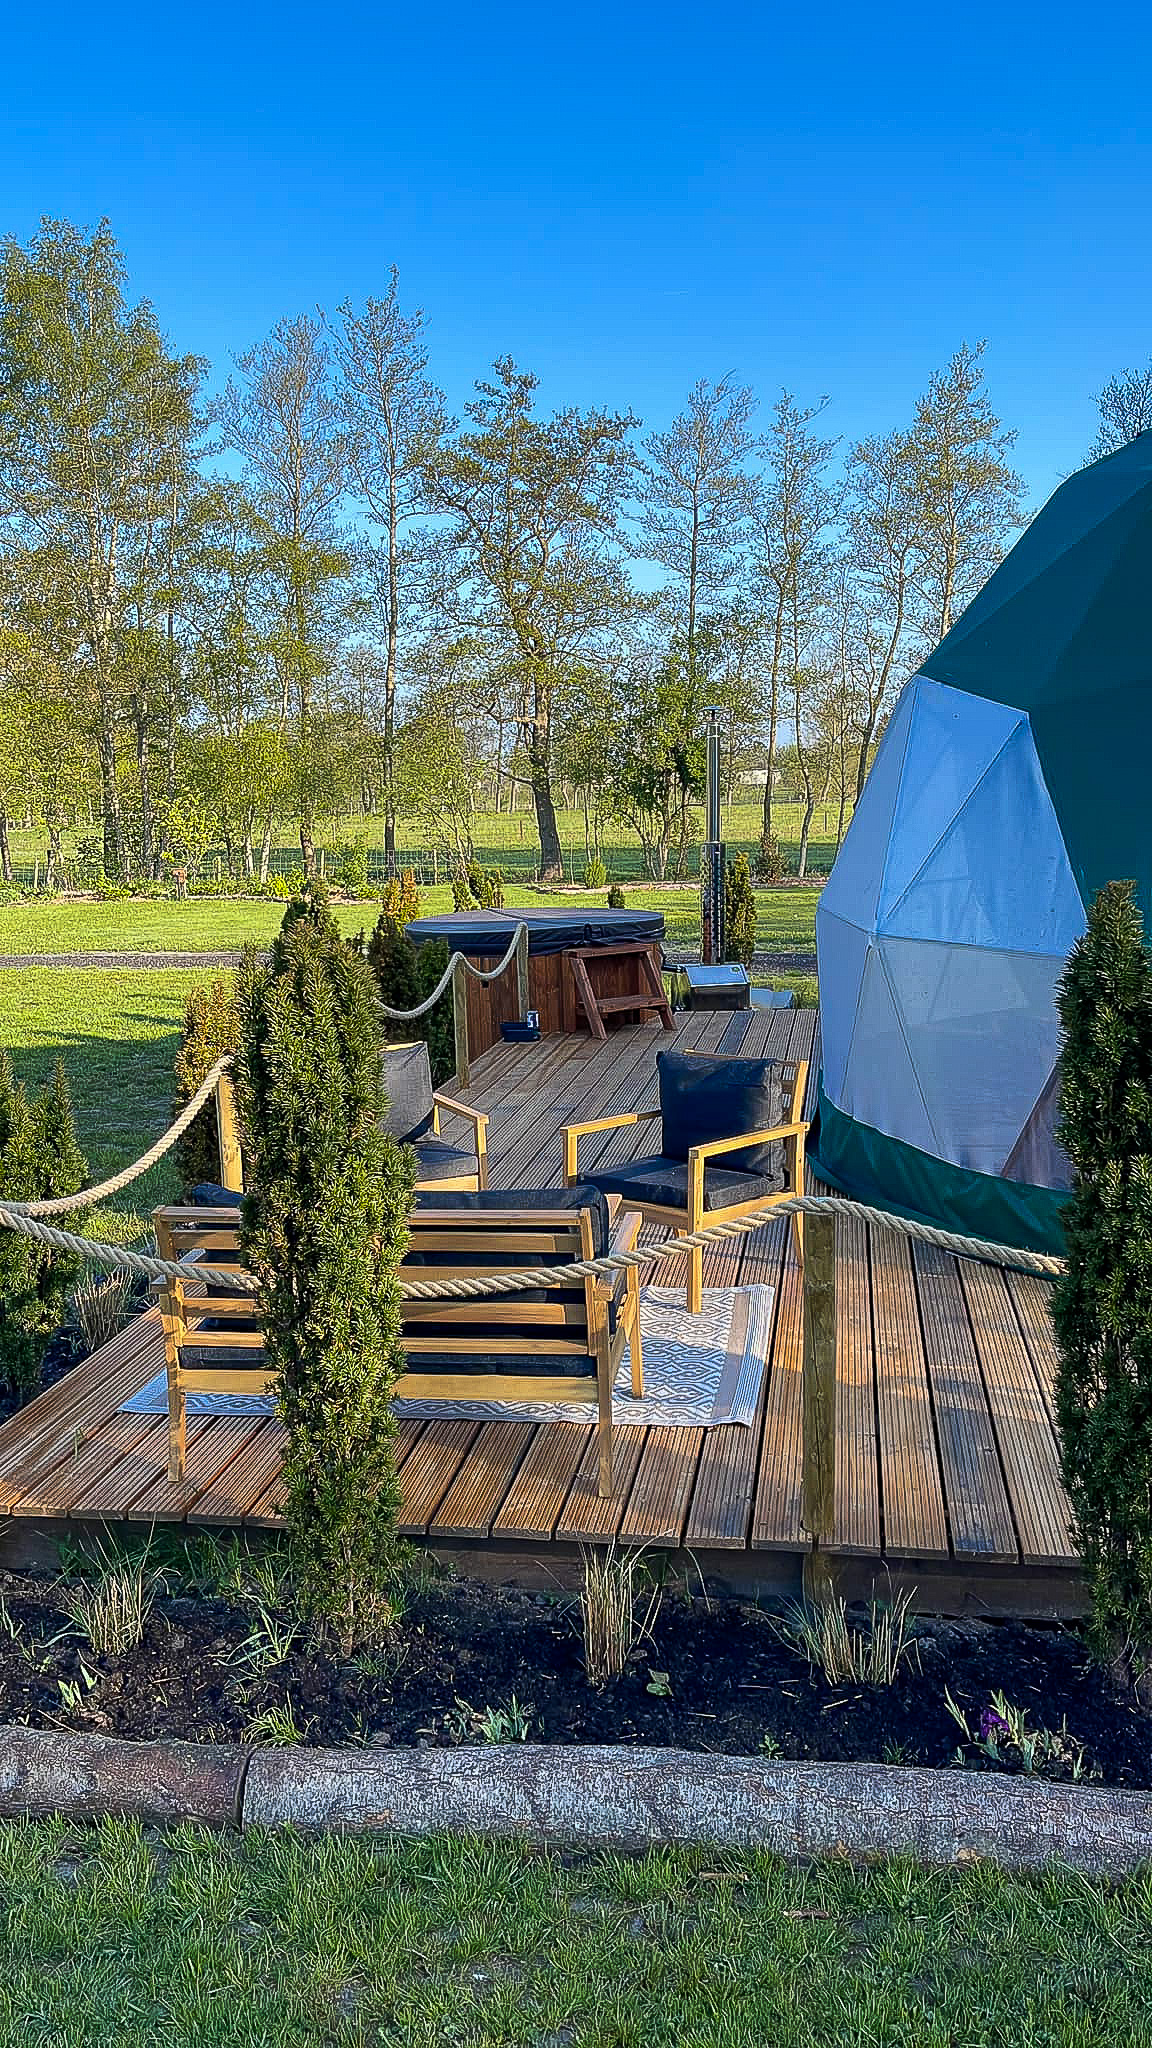 green geodesic dome on wooden deck with a tree and a table with two chairs